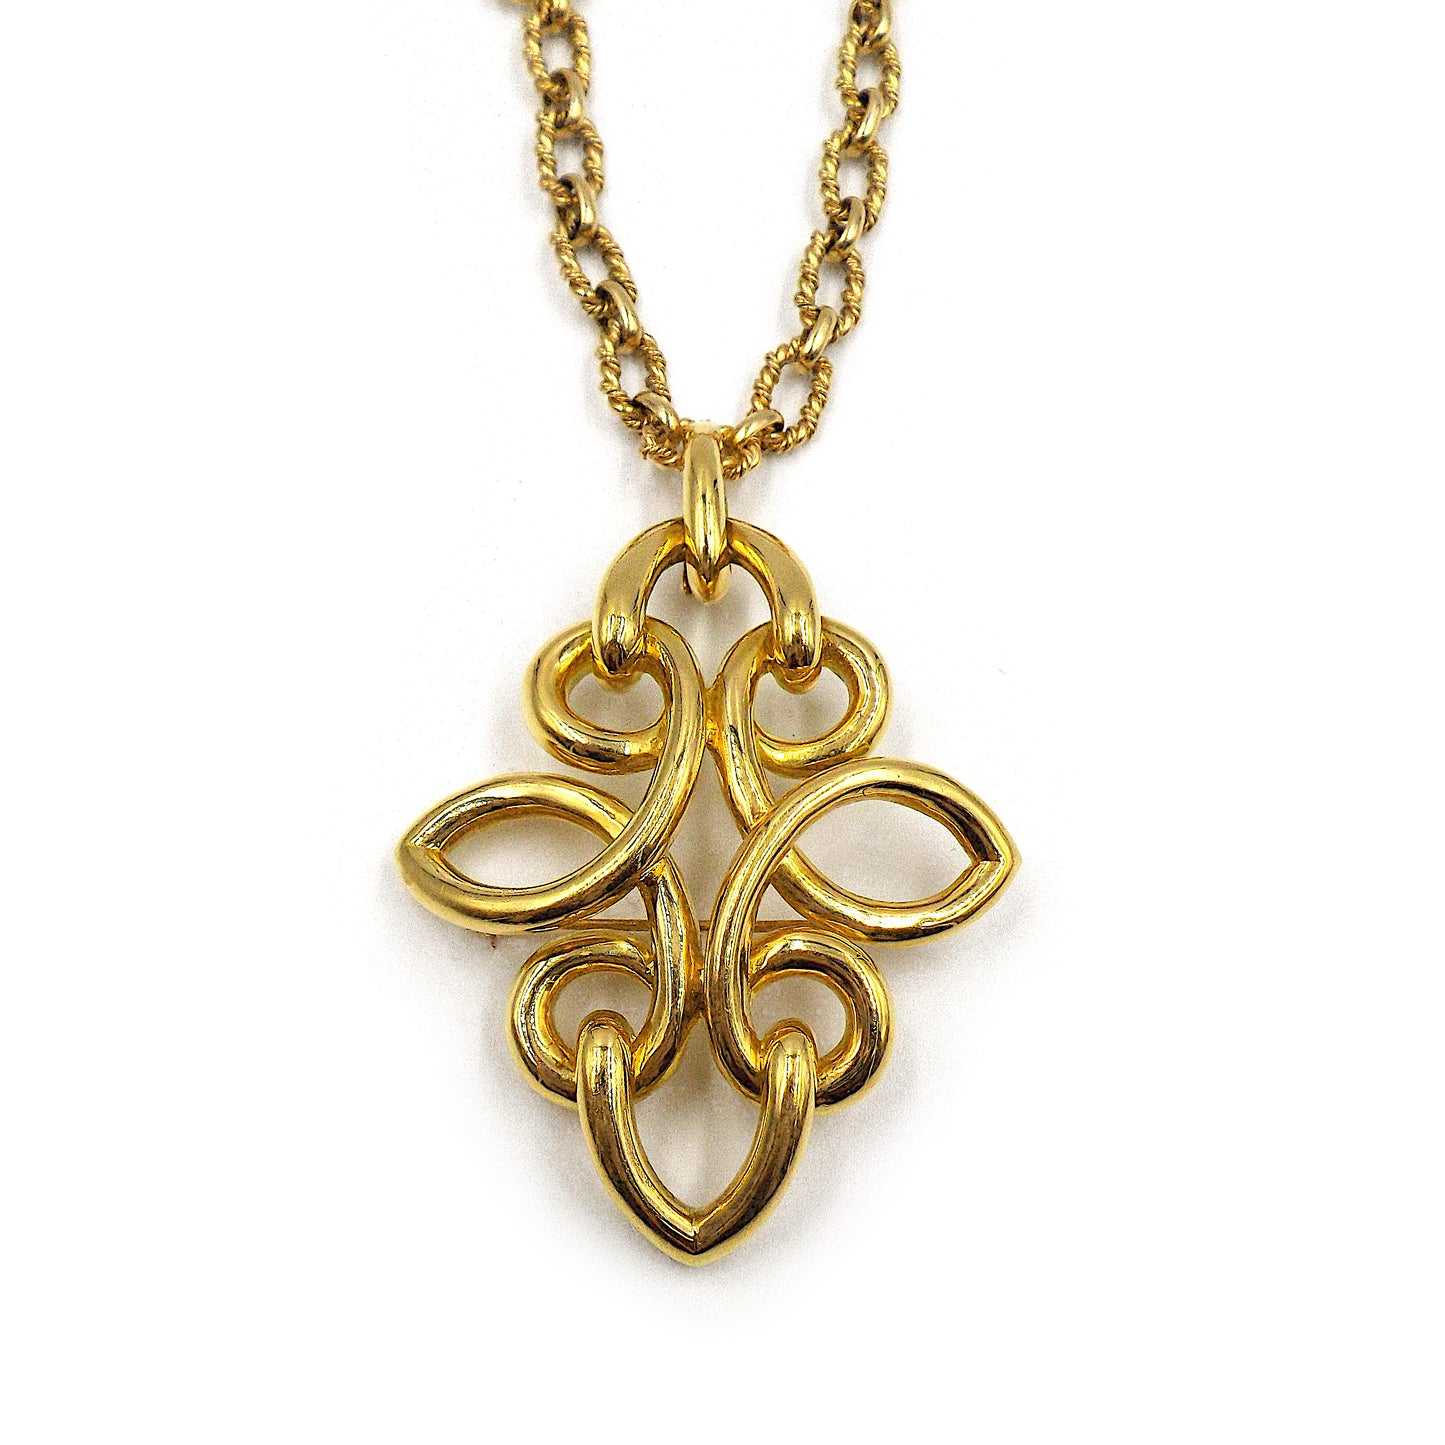 Vintage Yellow Gold Long Chain Pendant Necklace